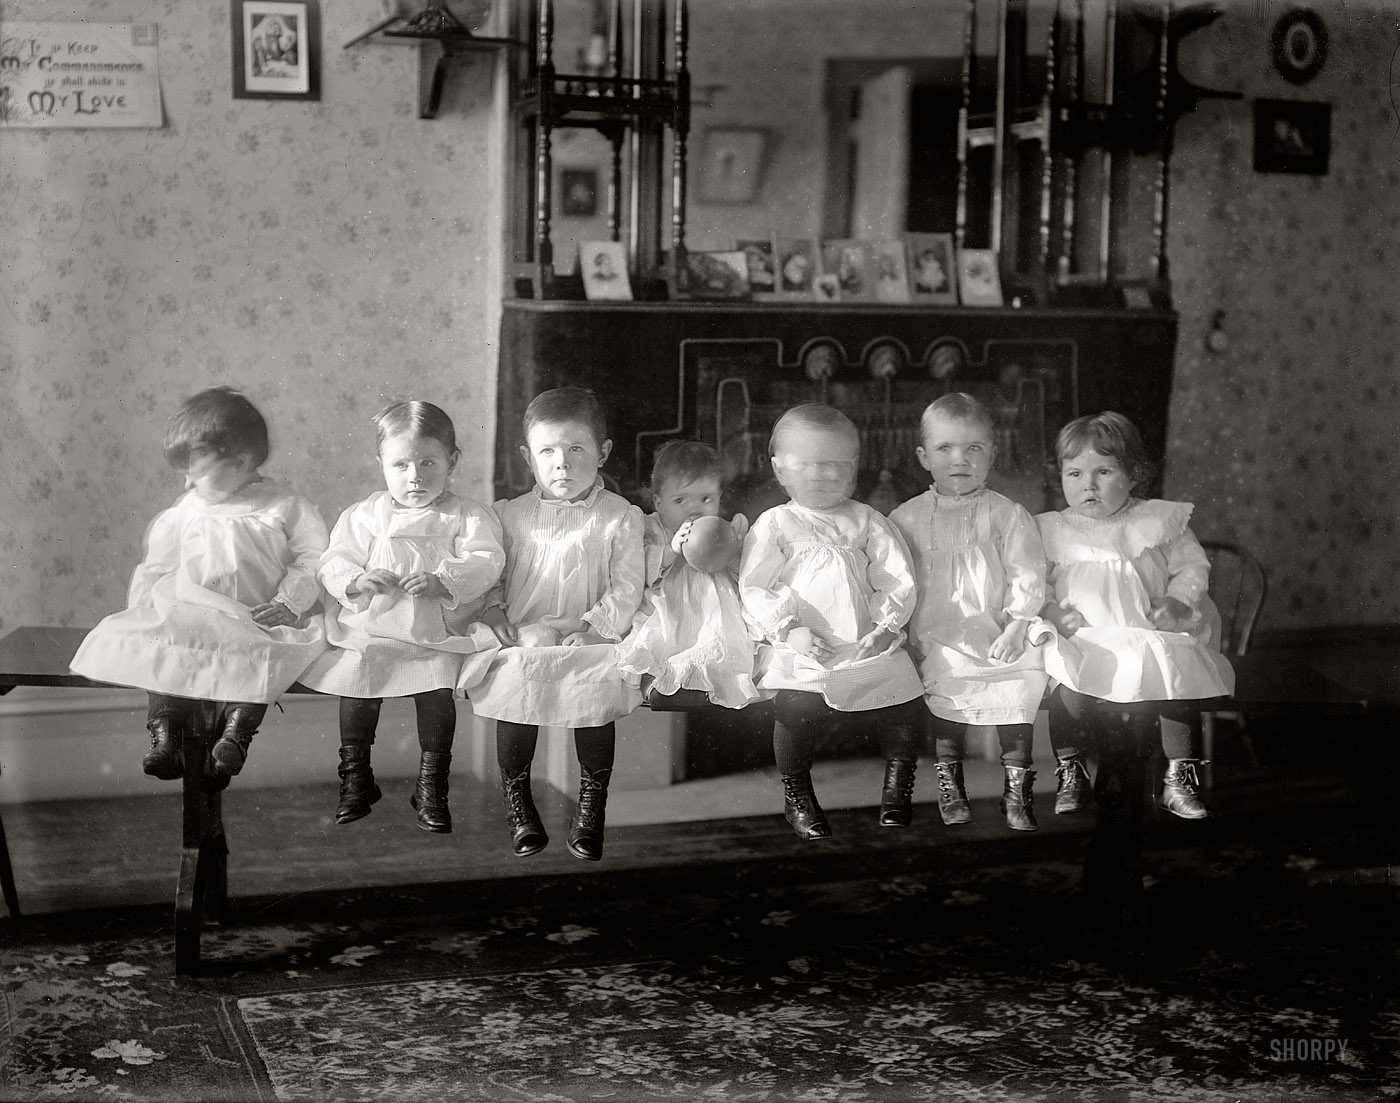 New York City, May 1908. "Children's Aid Society." A tottering array of tots. 8x10 glass negative, George Grantham Bain Collection. View full size.